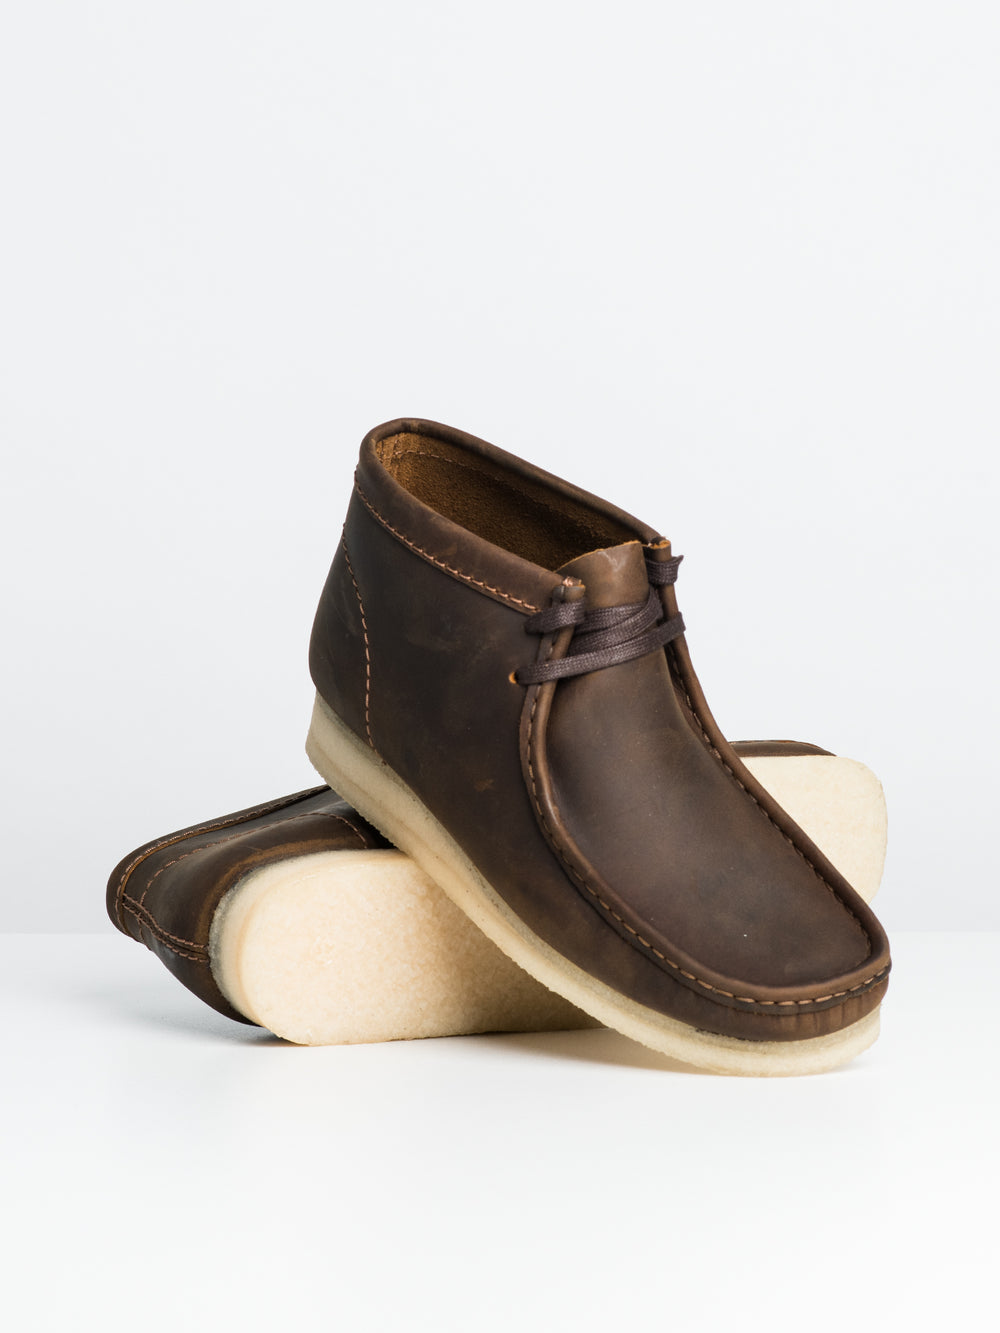 MENS CLARKS WALLABEE BOOT